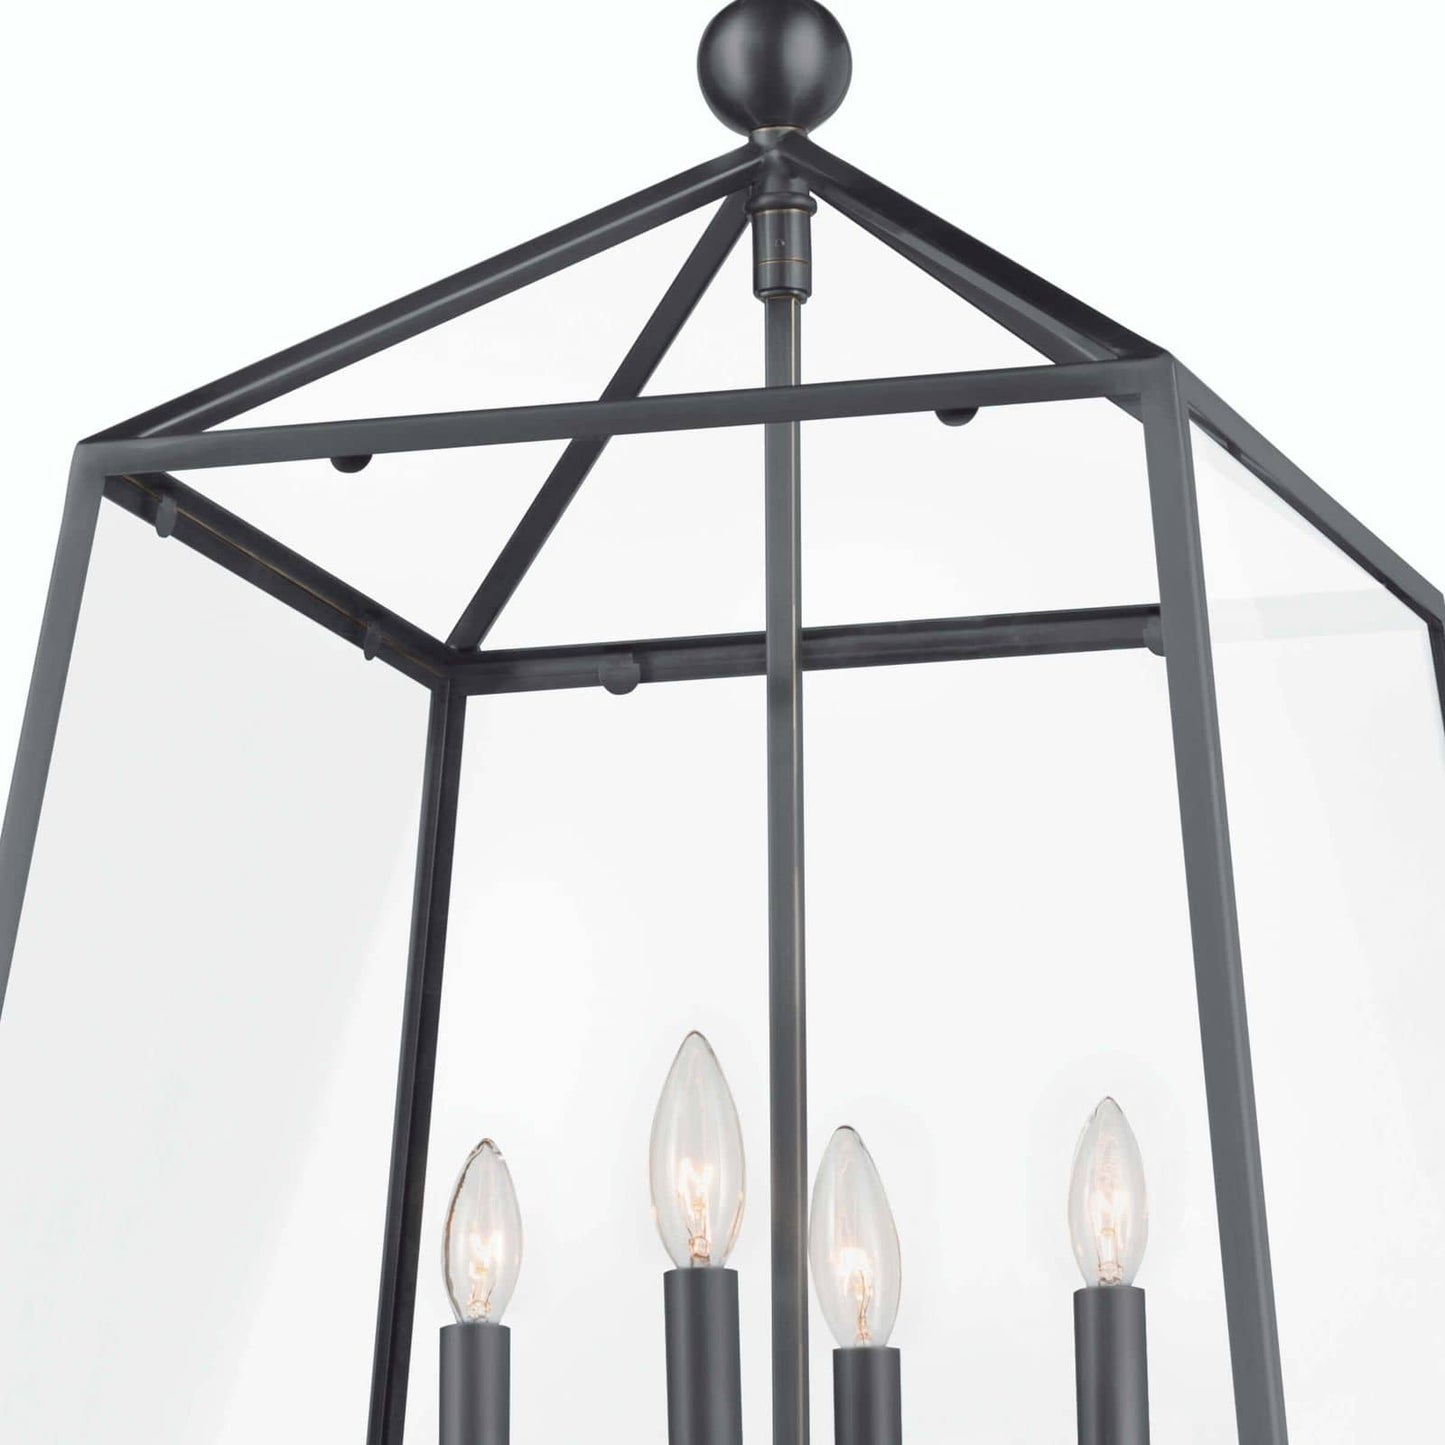 Cachet Lantern in Oil Rubbed Bronze by Coastal Living